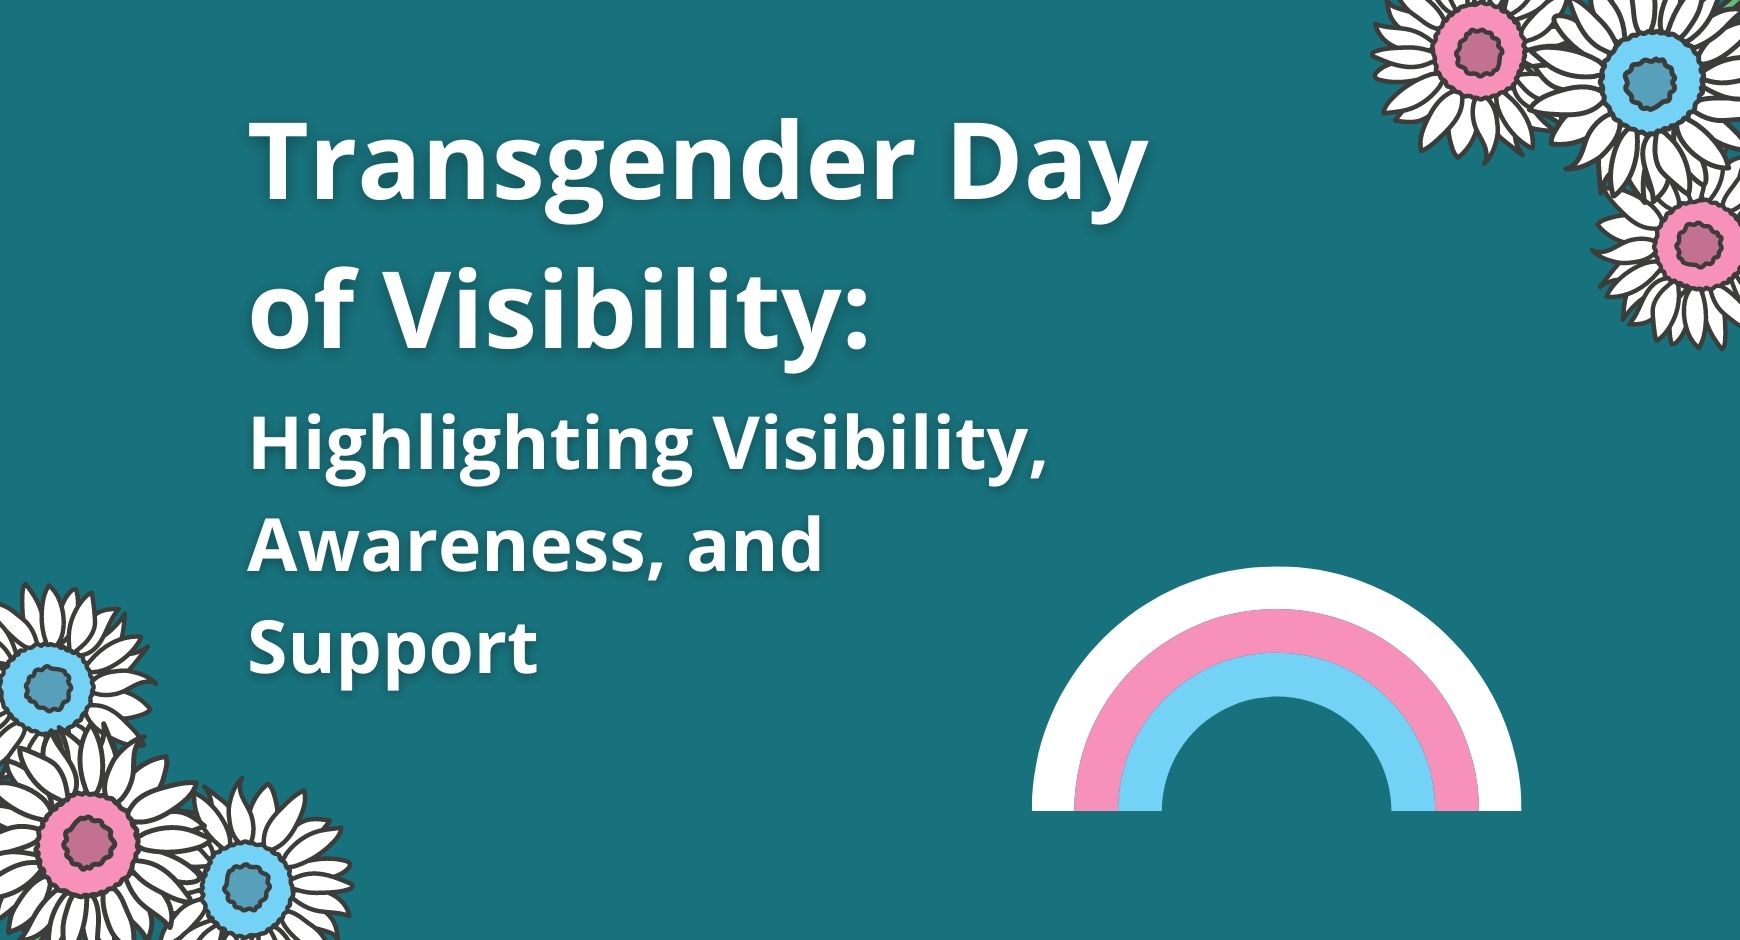 A title card with daisies in the corners with blue or pink centers and white petals, a rainbow with white, pink, and blue stripes, ad words that read "Transgender Day of Visibility: Highlighting Visibility, Awareness, and Support"